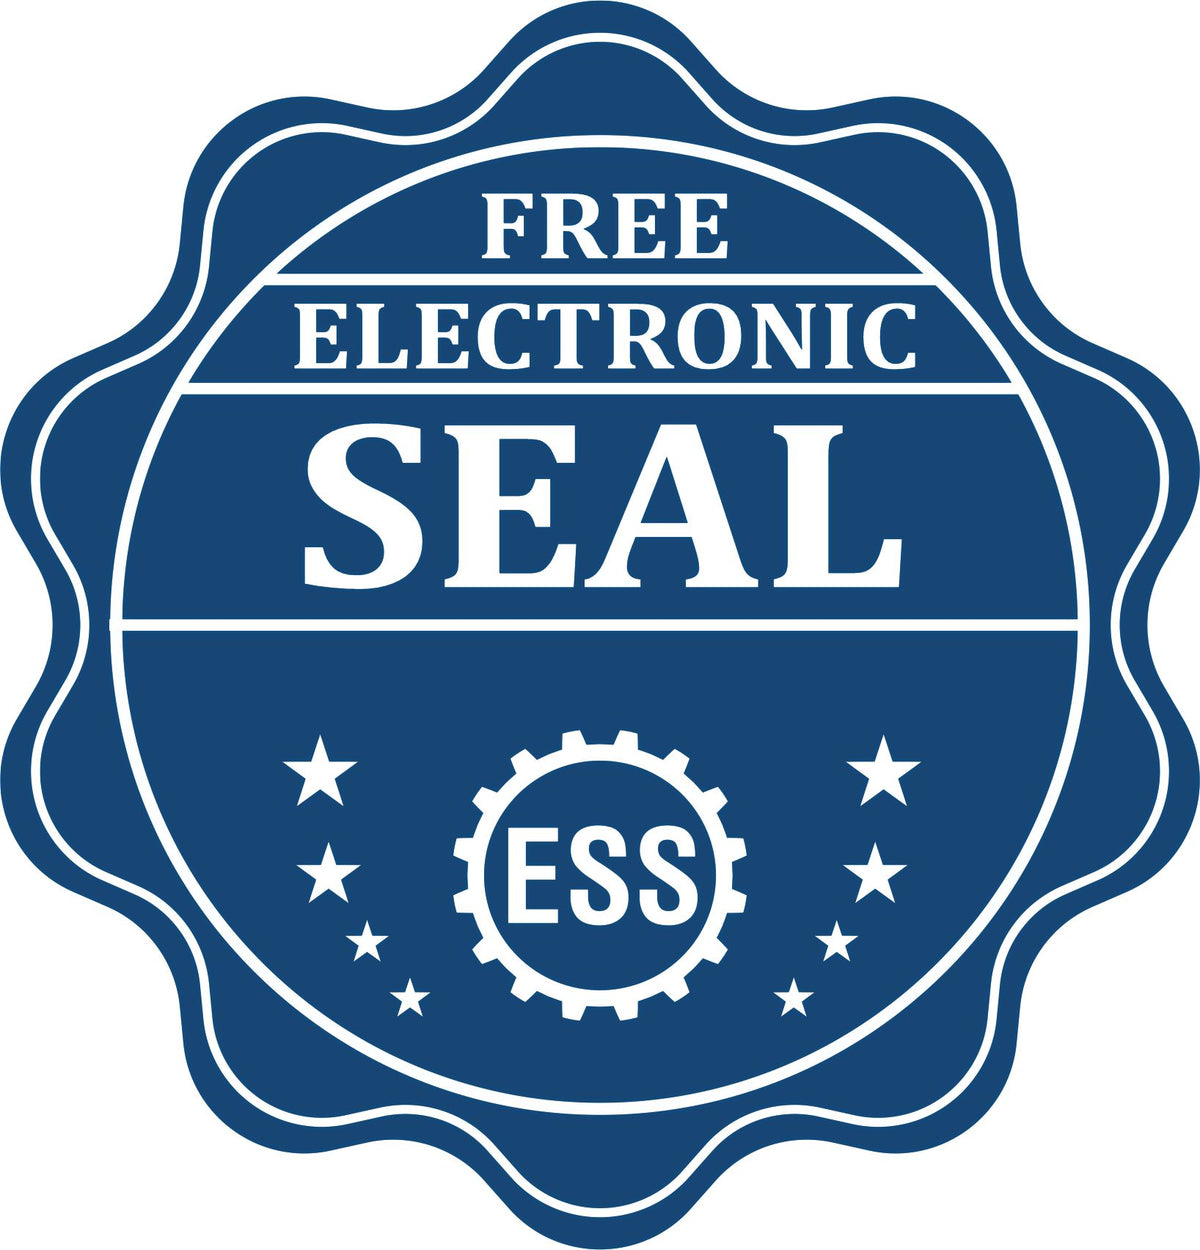 A badge showing a free electronic seal for the Hybrid Louisiana Geologist Seal with stars and the ESS gear on the emblem.